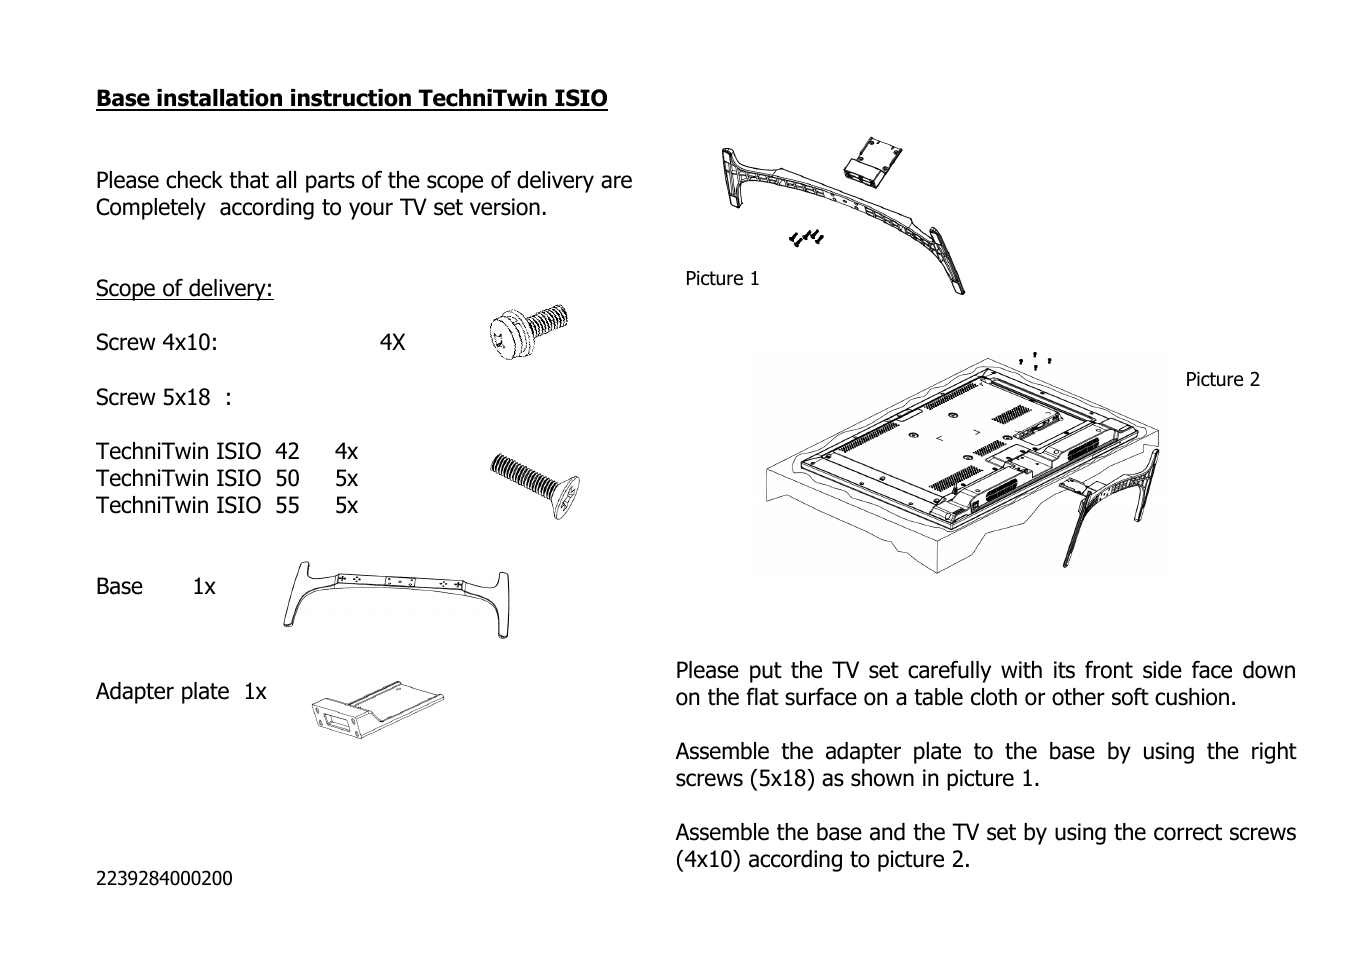 TechniTwin ISIO 50 Mounting instruction